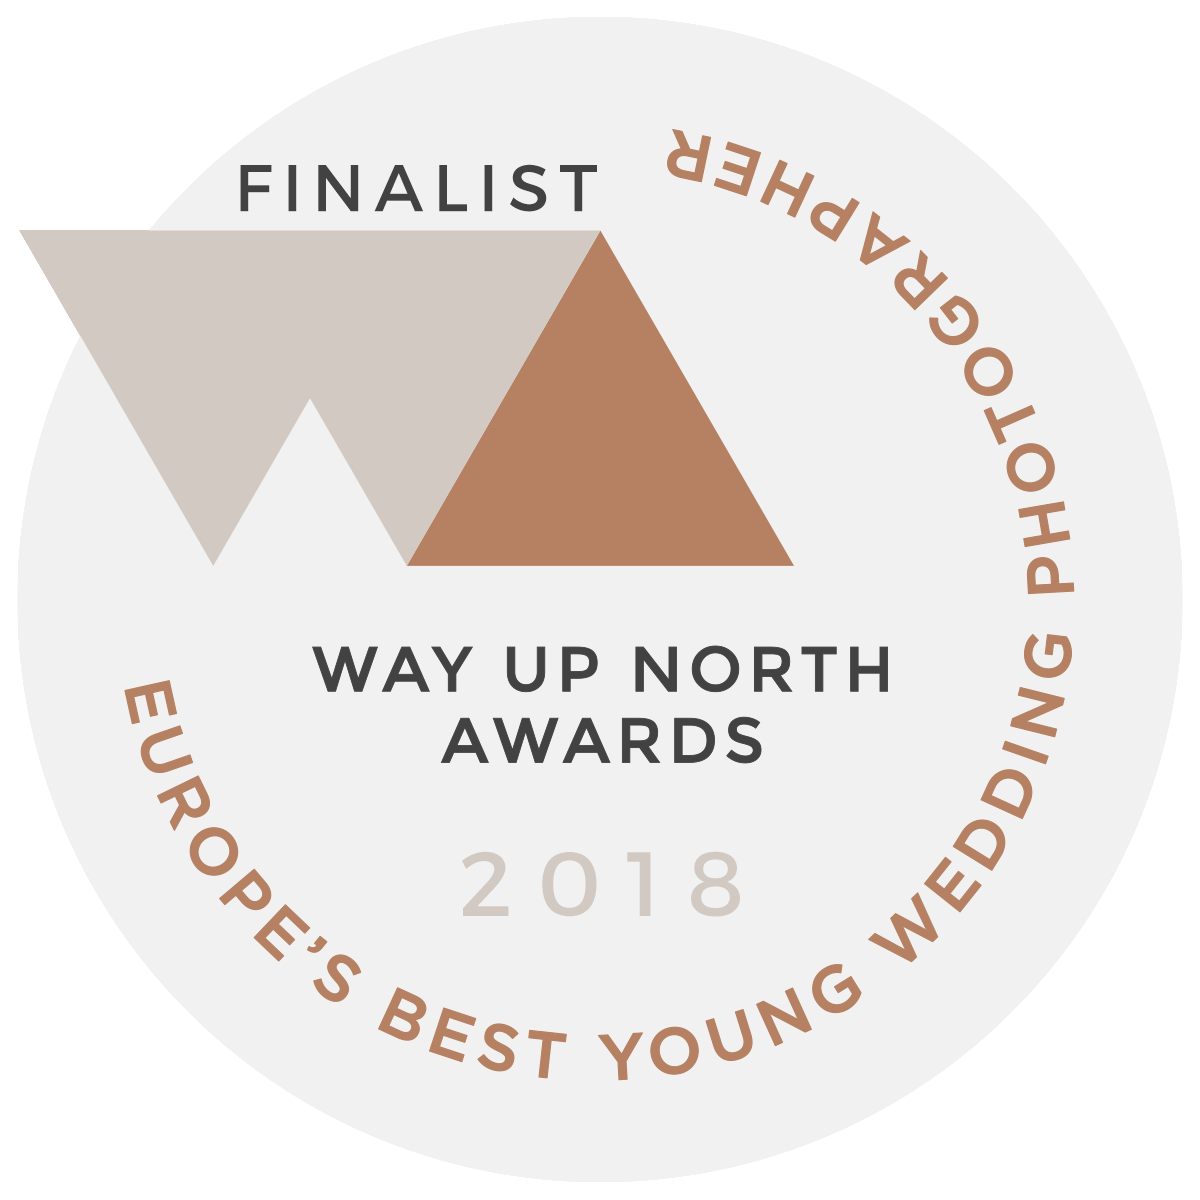 Way Up North Awards 'Europes Best Young Wedding Photographer' Finalist 2018